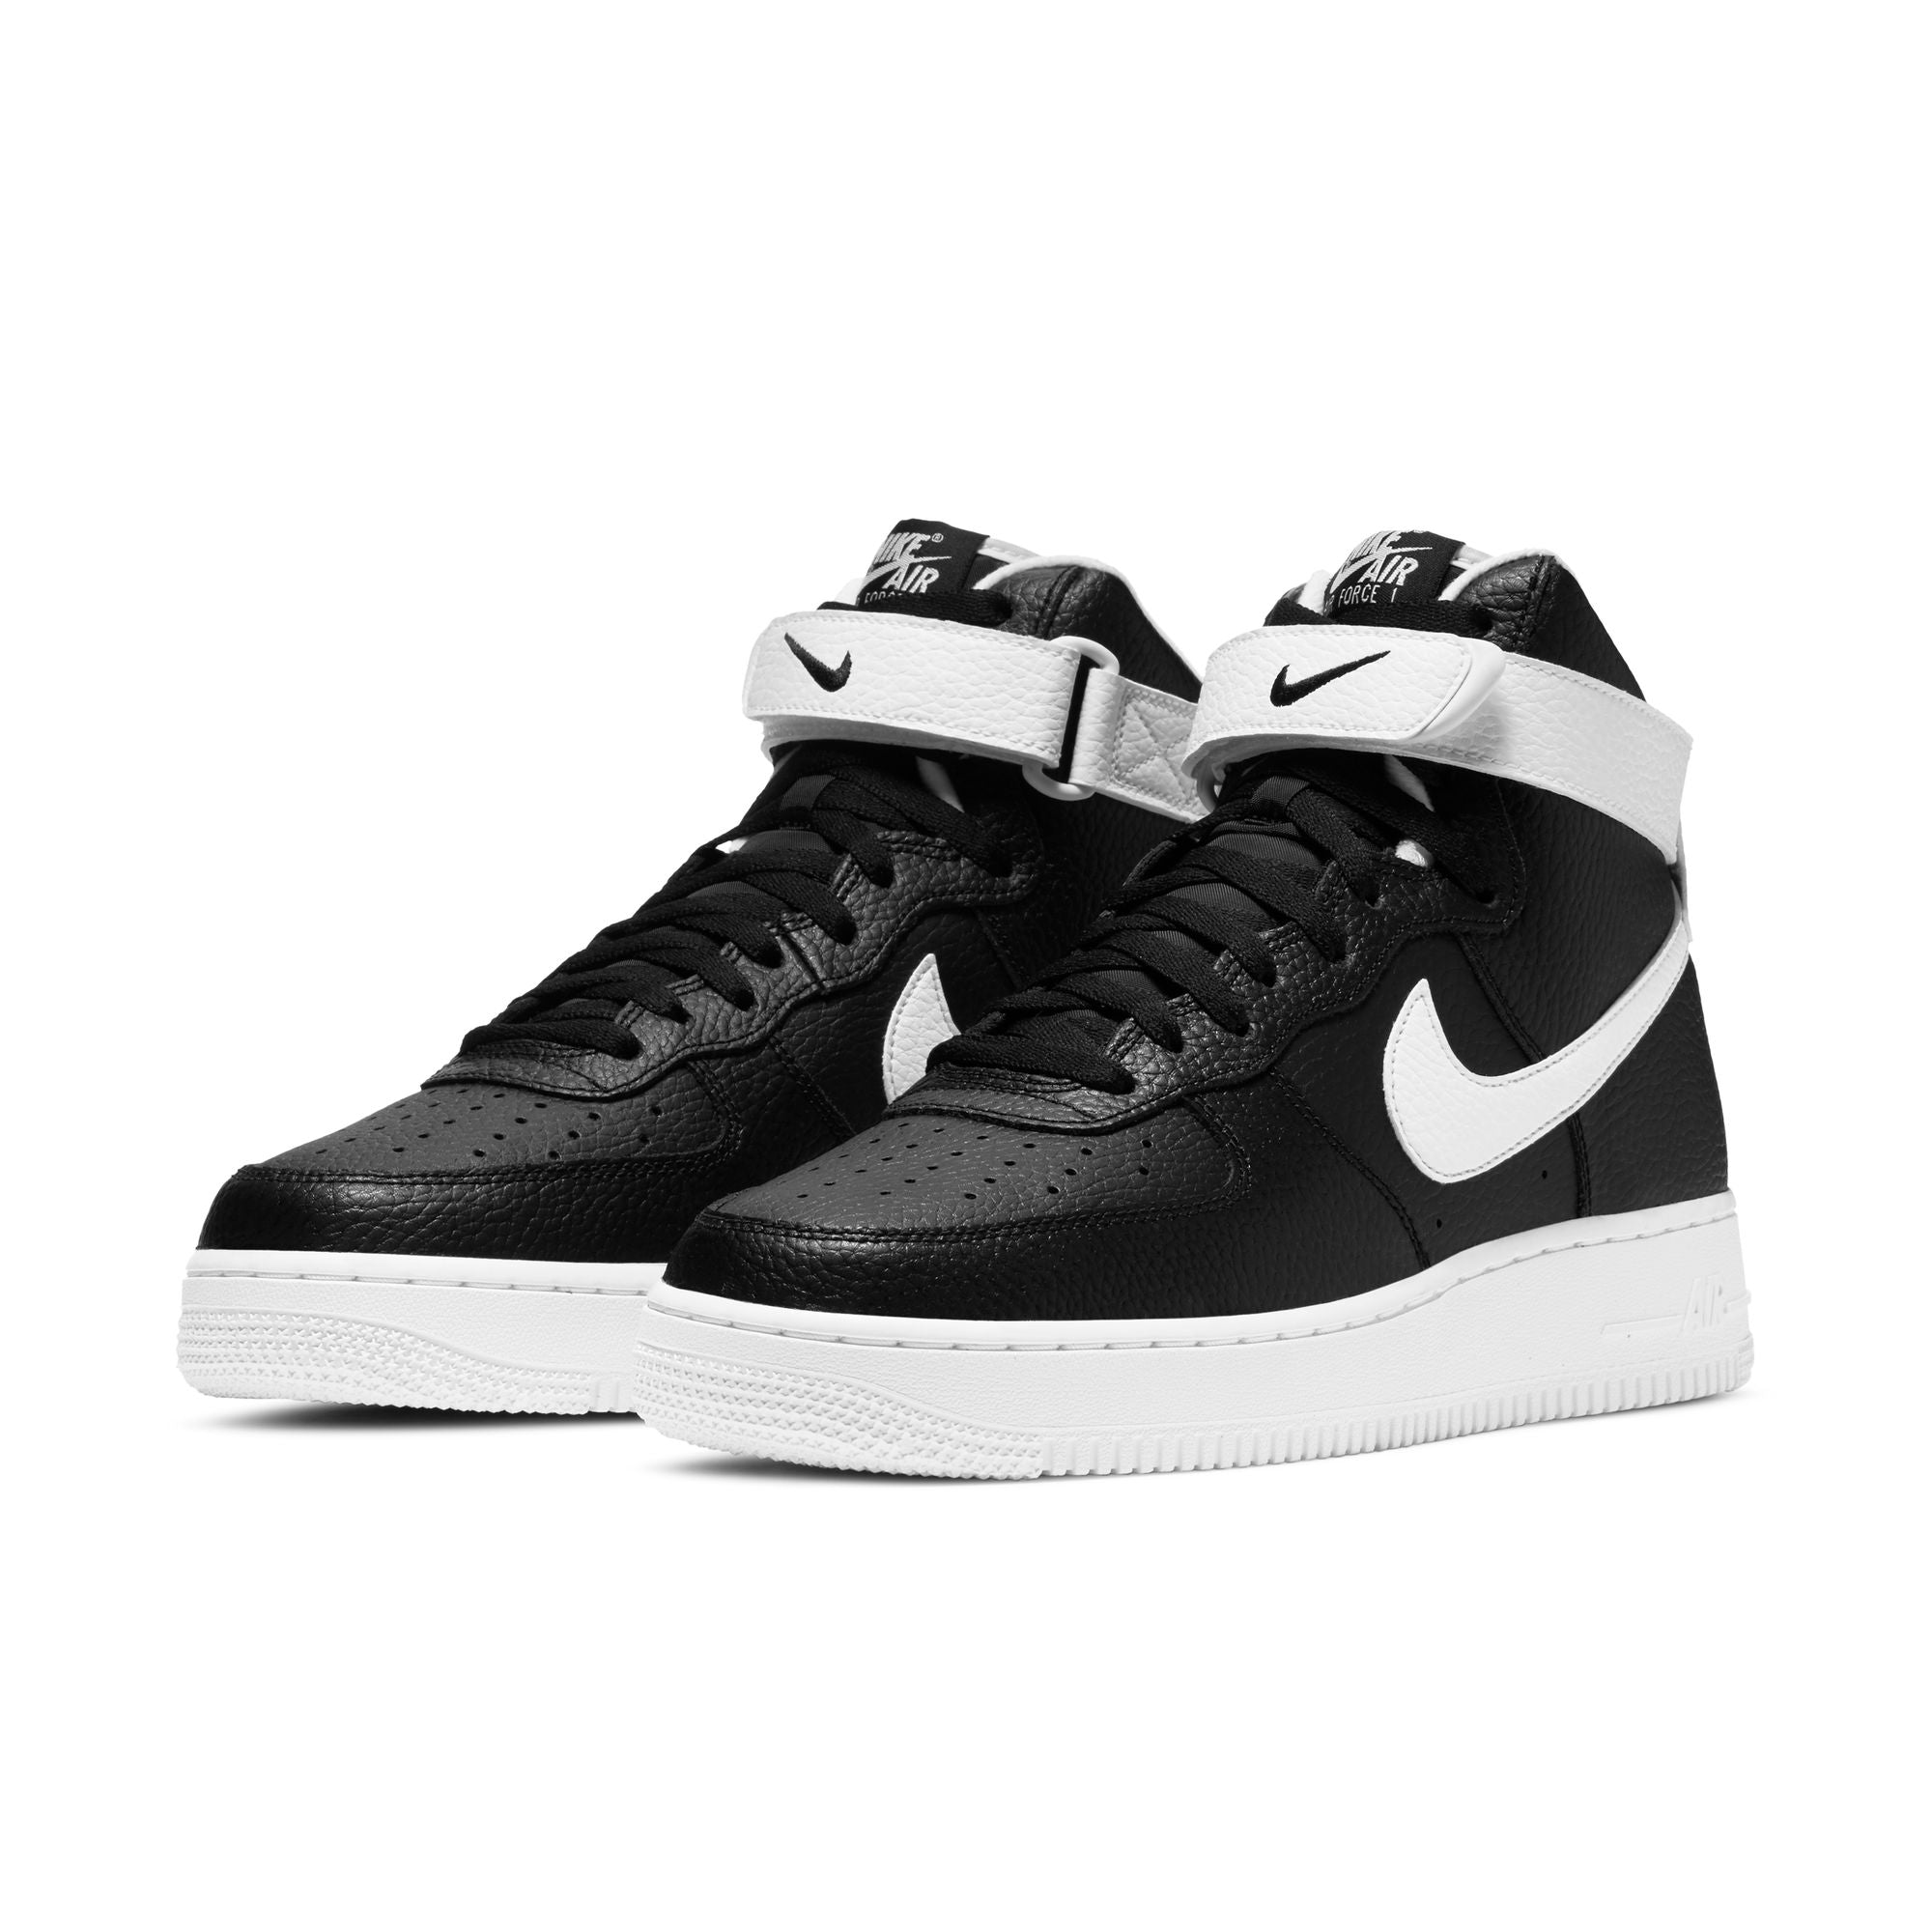 Nike Men's Air Force 1 Mid '07 LV8 Shoes in Black, Size: 10.5 | DZ2554-001